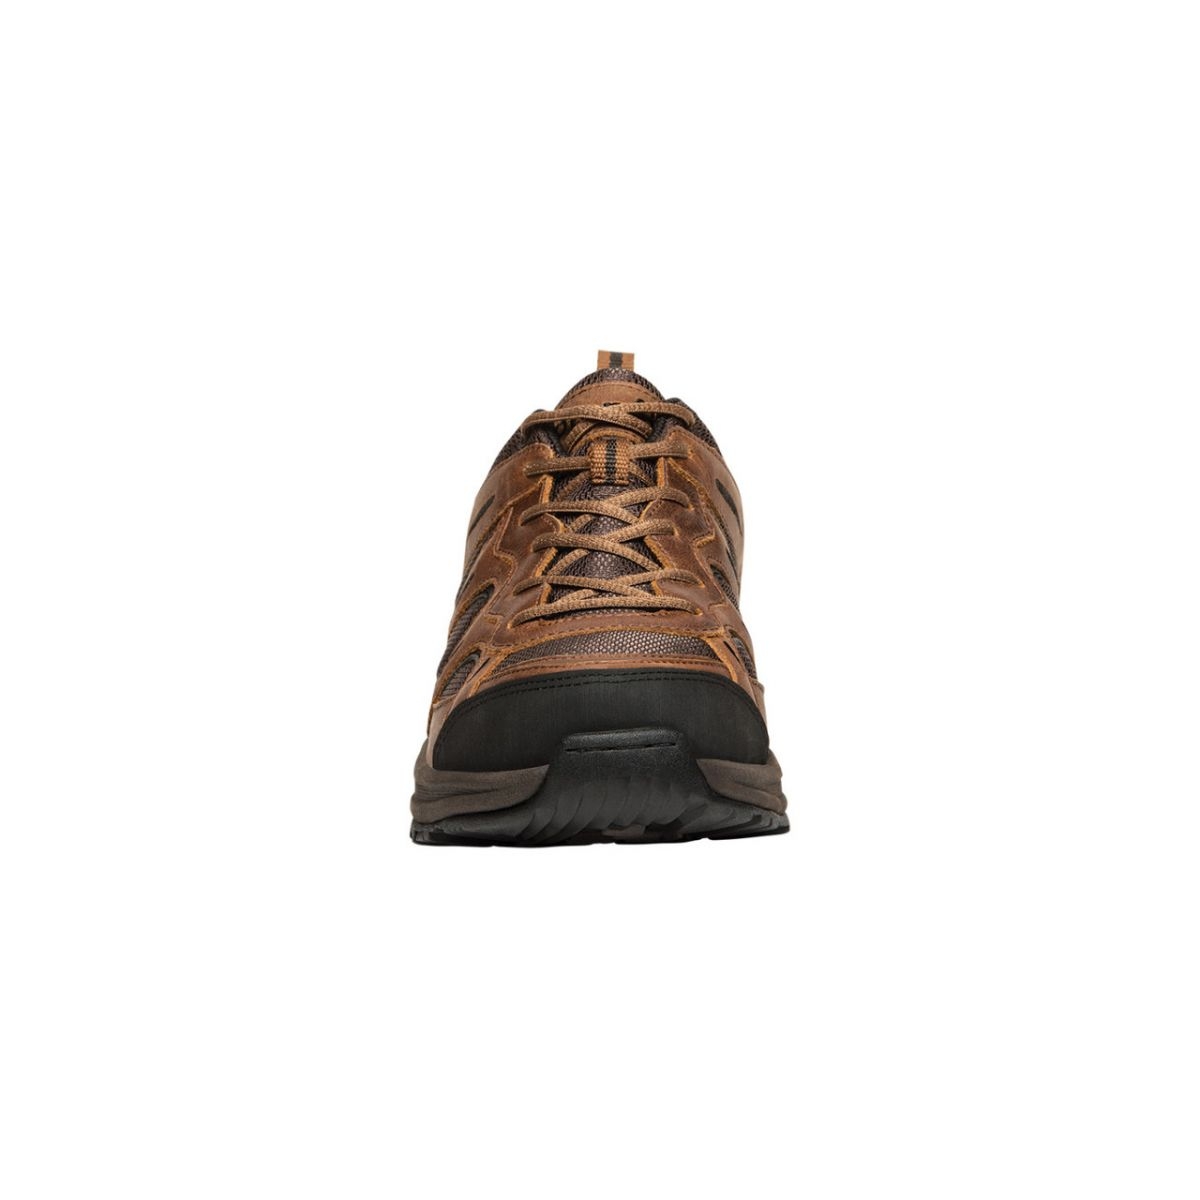 Propet Men's Connelly Hiking Shoe Brown - M5503BR BROWN - BROWN, 15-3E